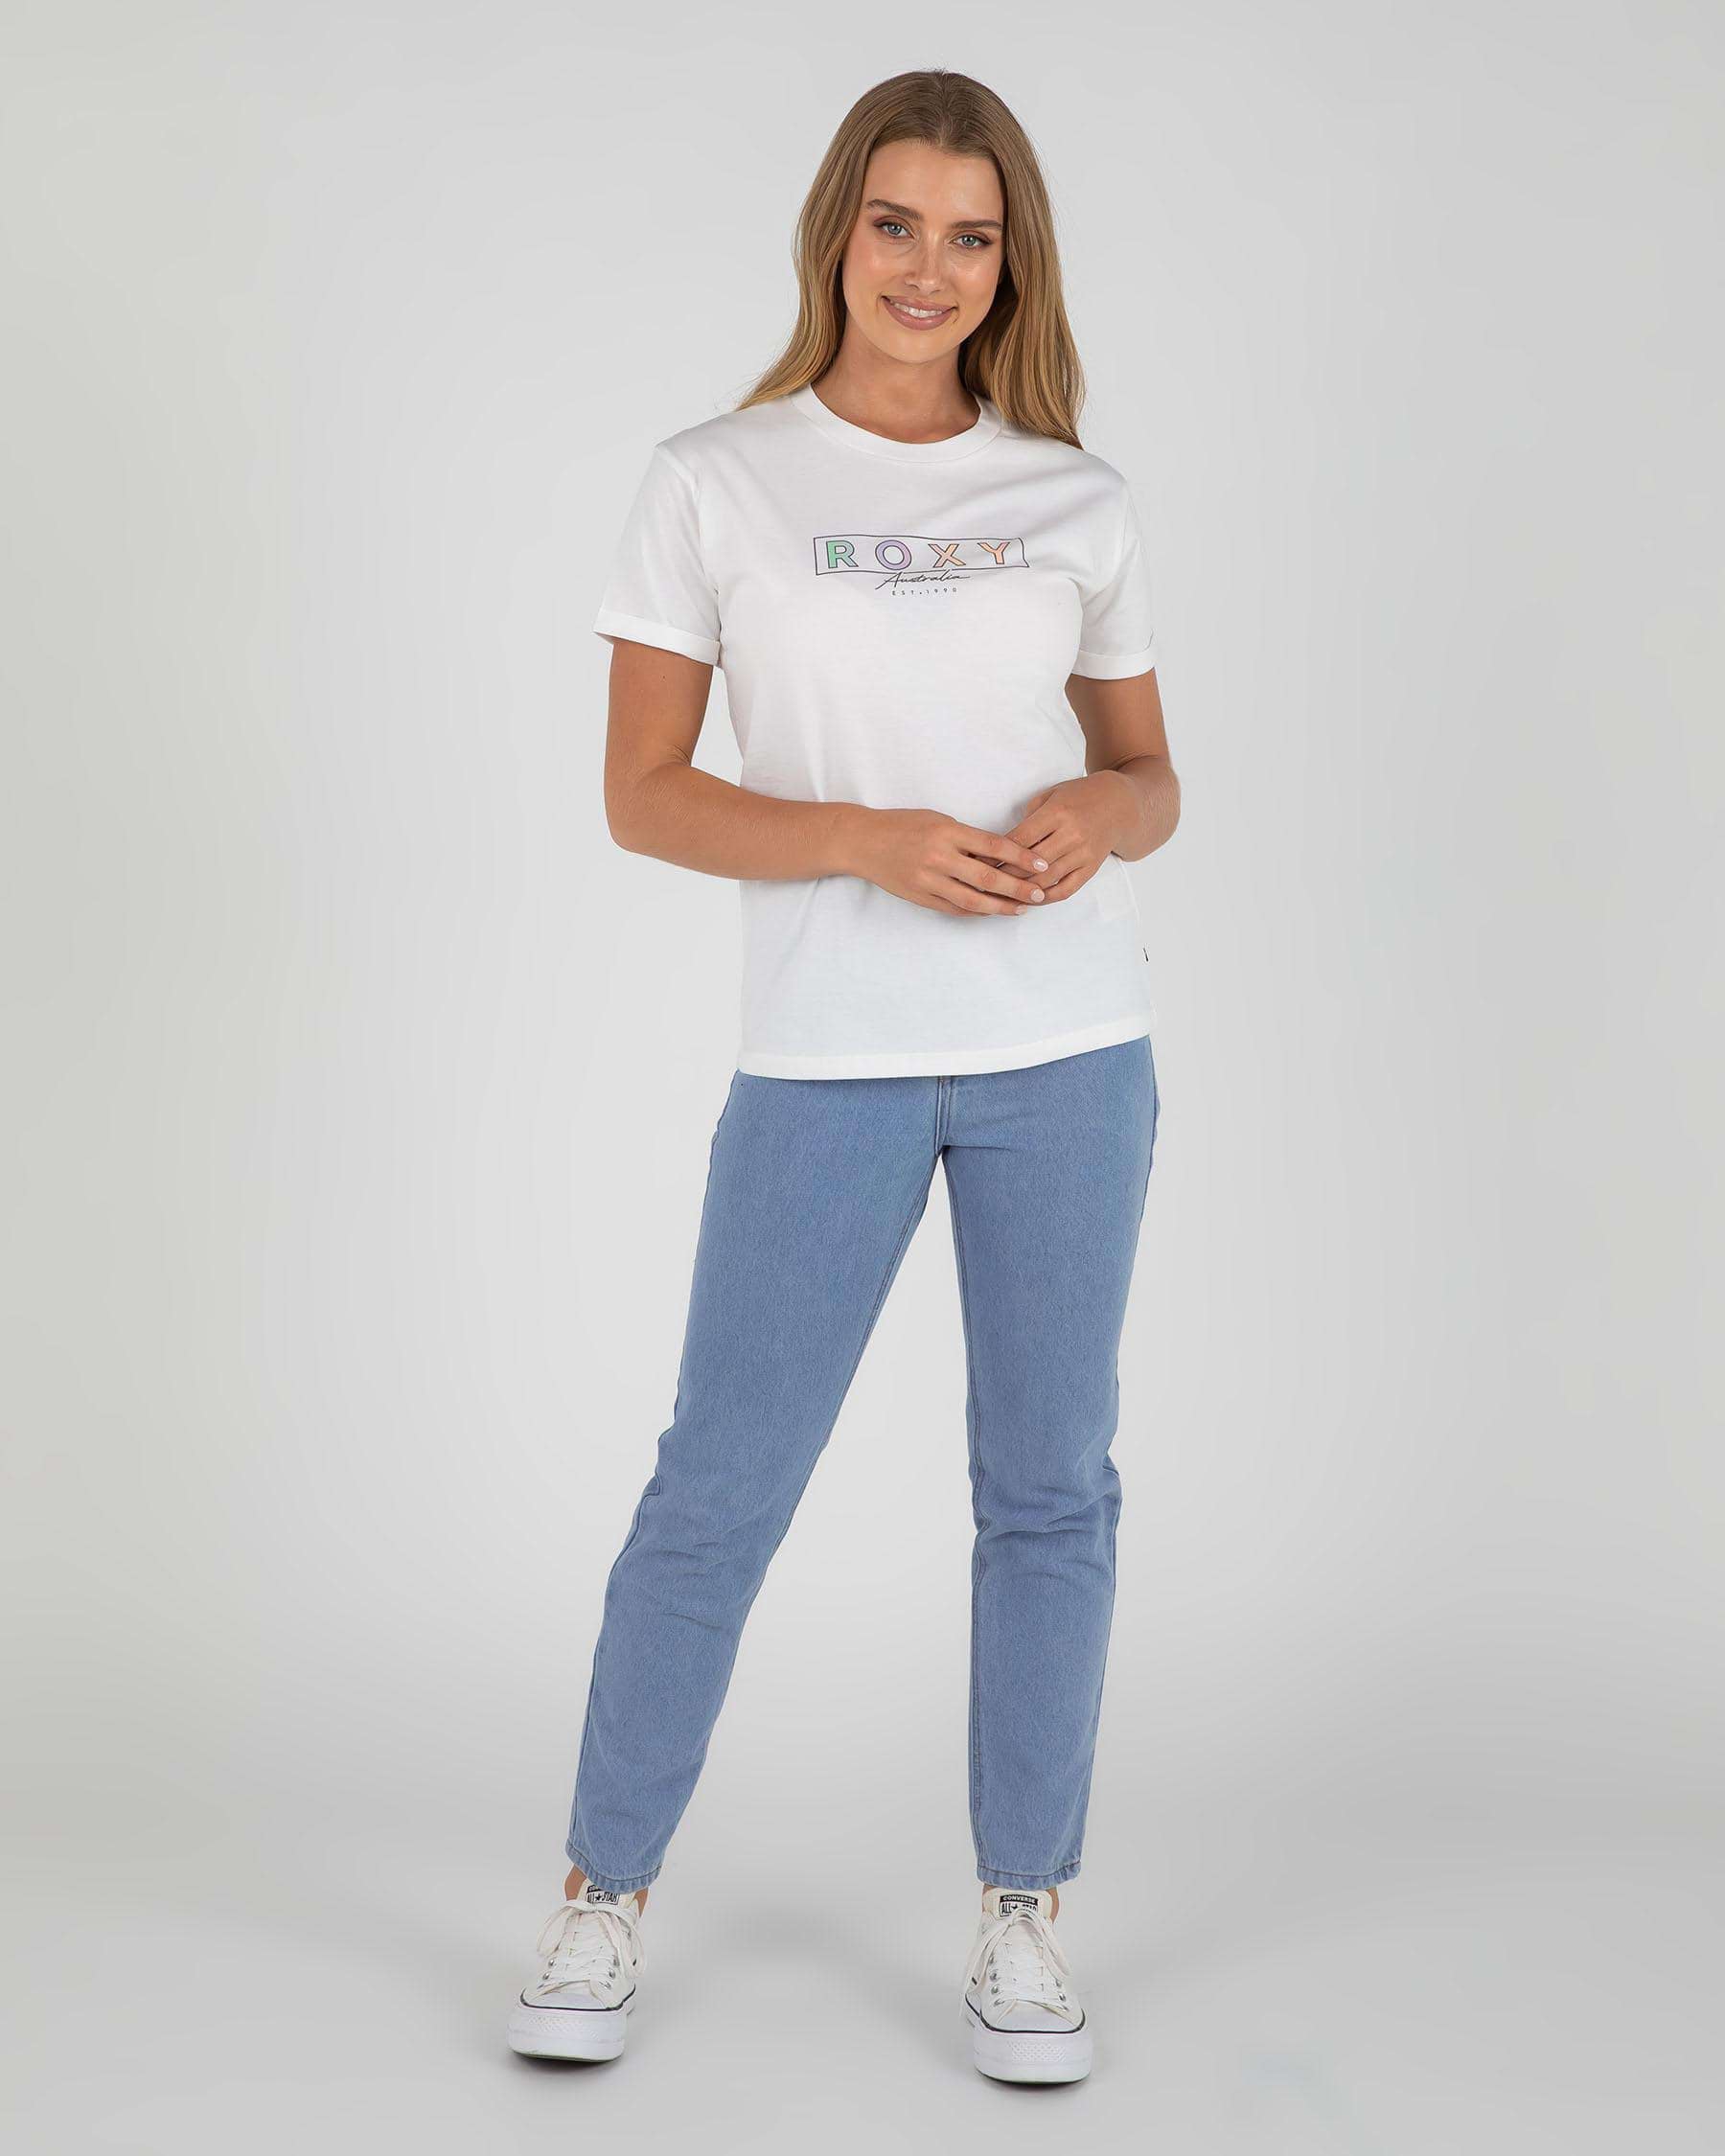 Roxy Destination T-Shirt In Bright White - Fast Shipping & Easy Returns ...